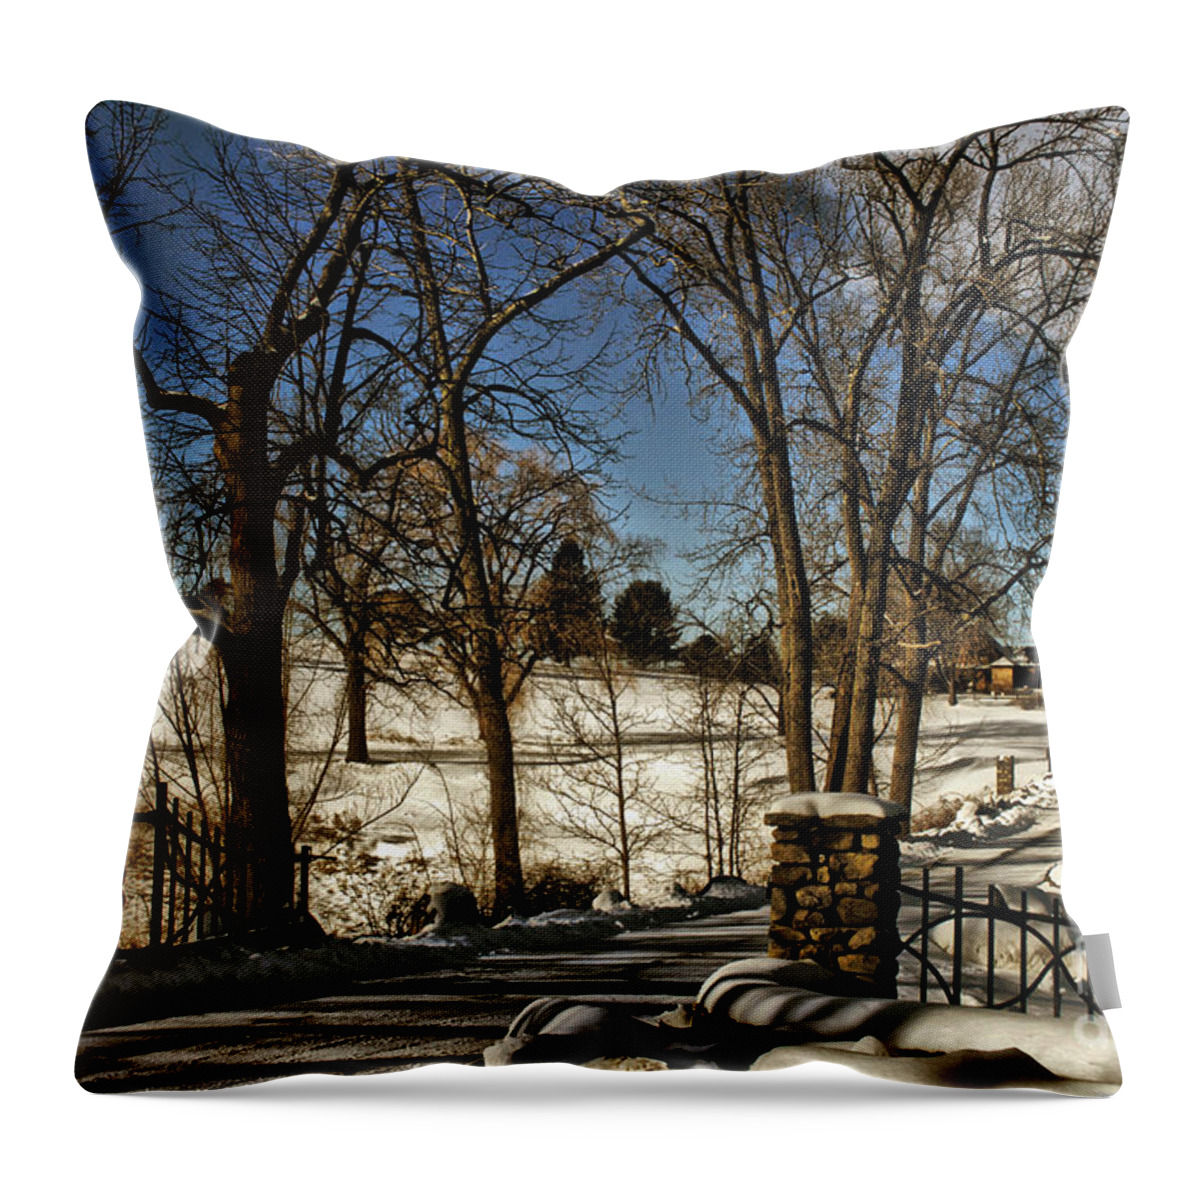 Snow Throw Pillow featuring the photograph Snowy Gates by Onedayoneimage Photography